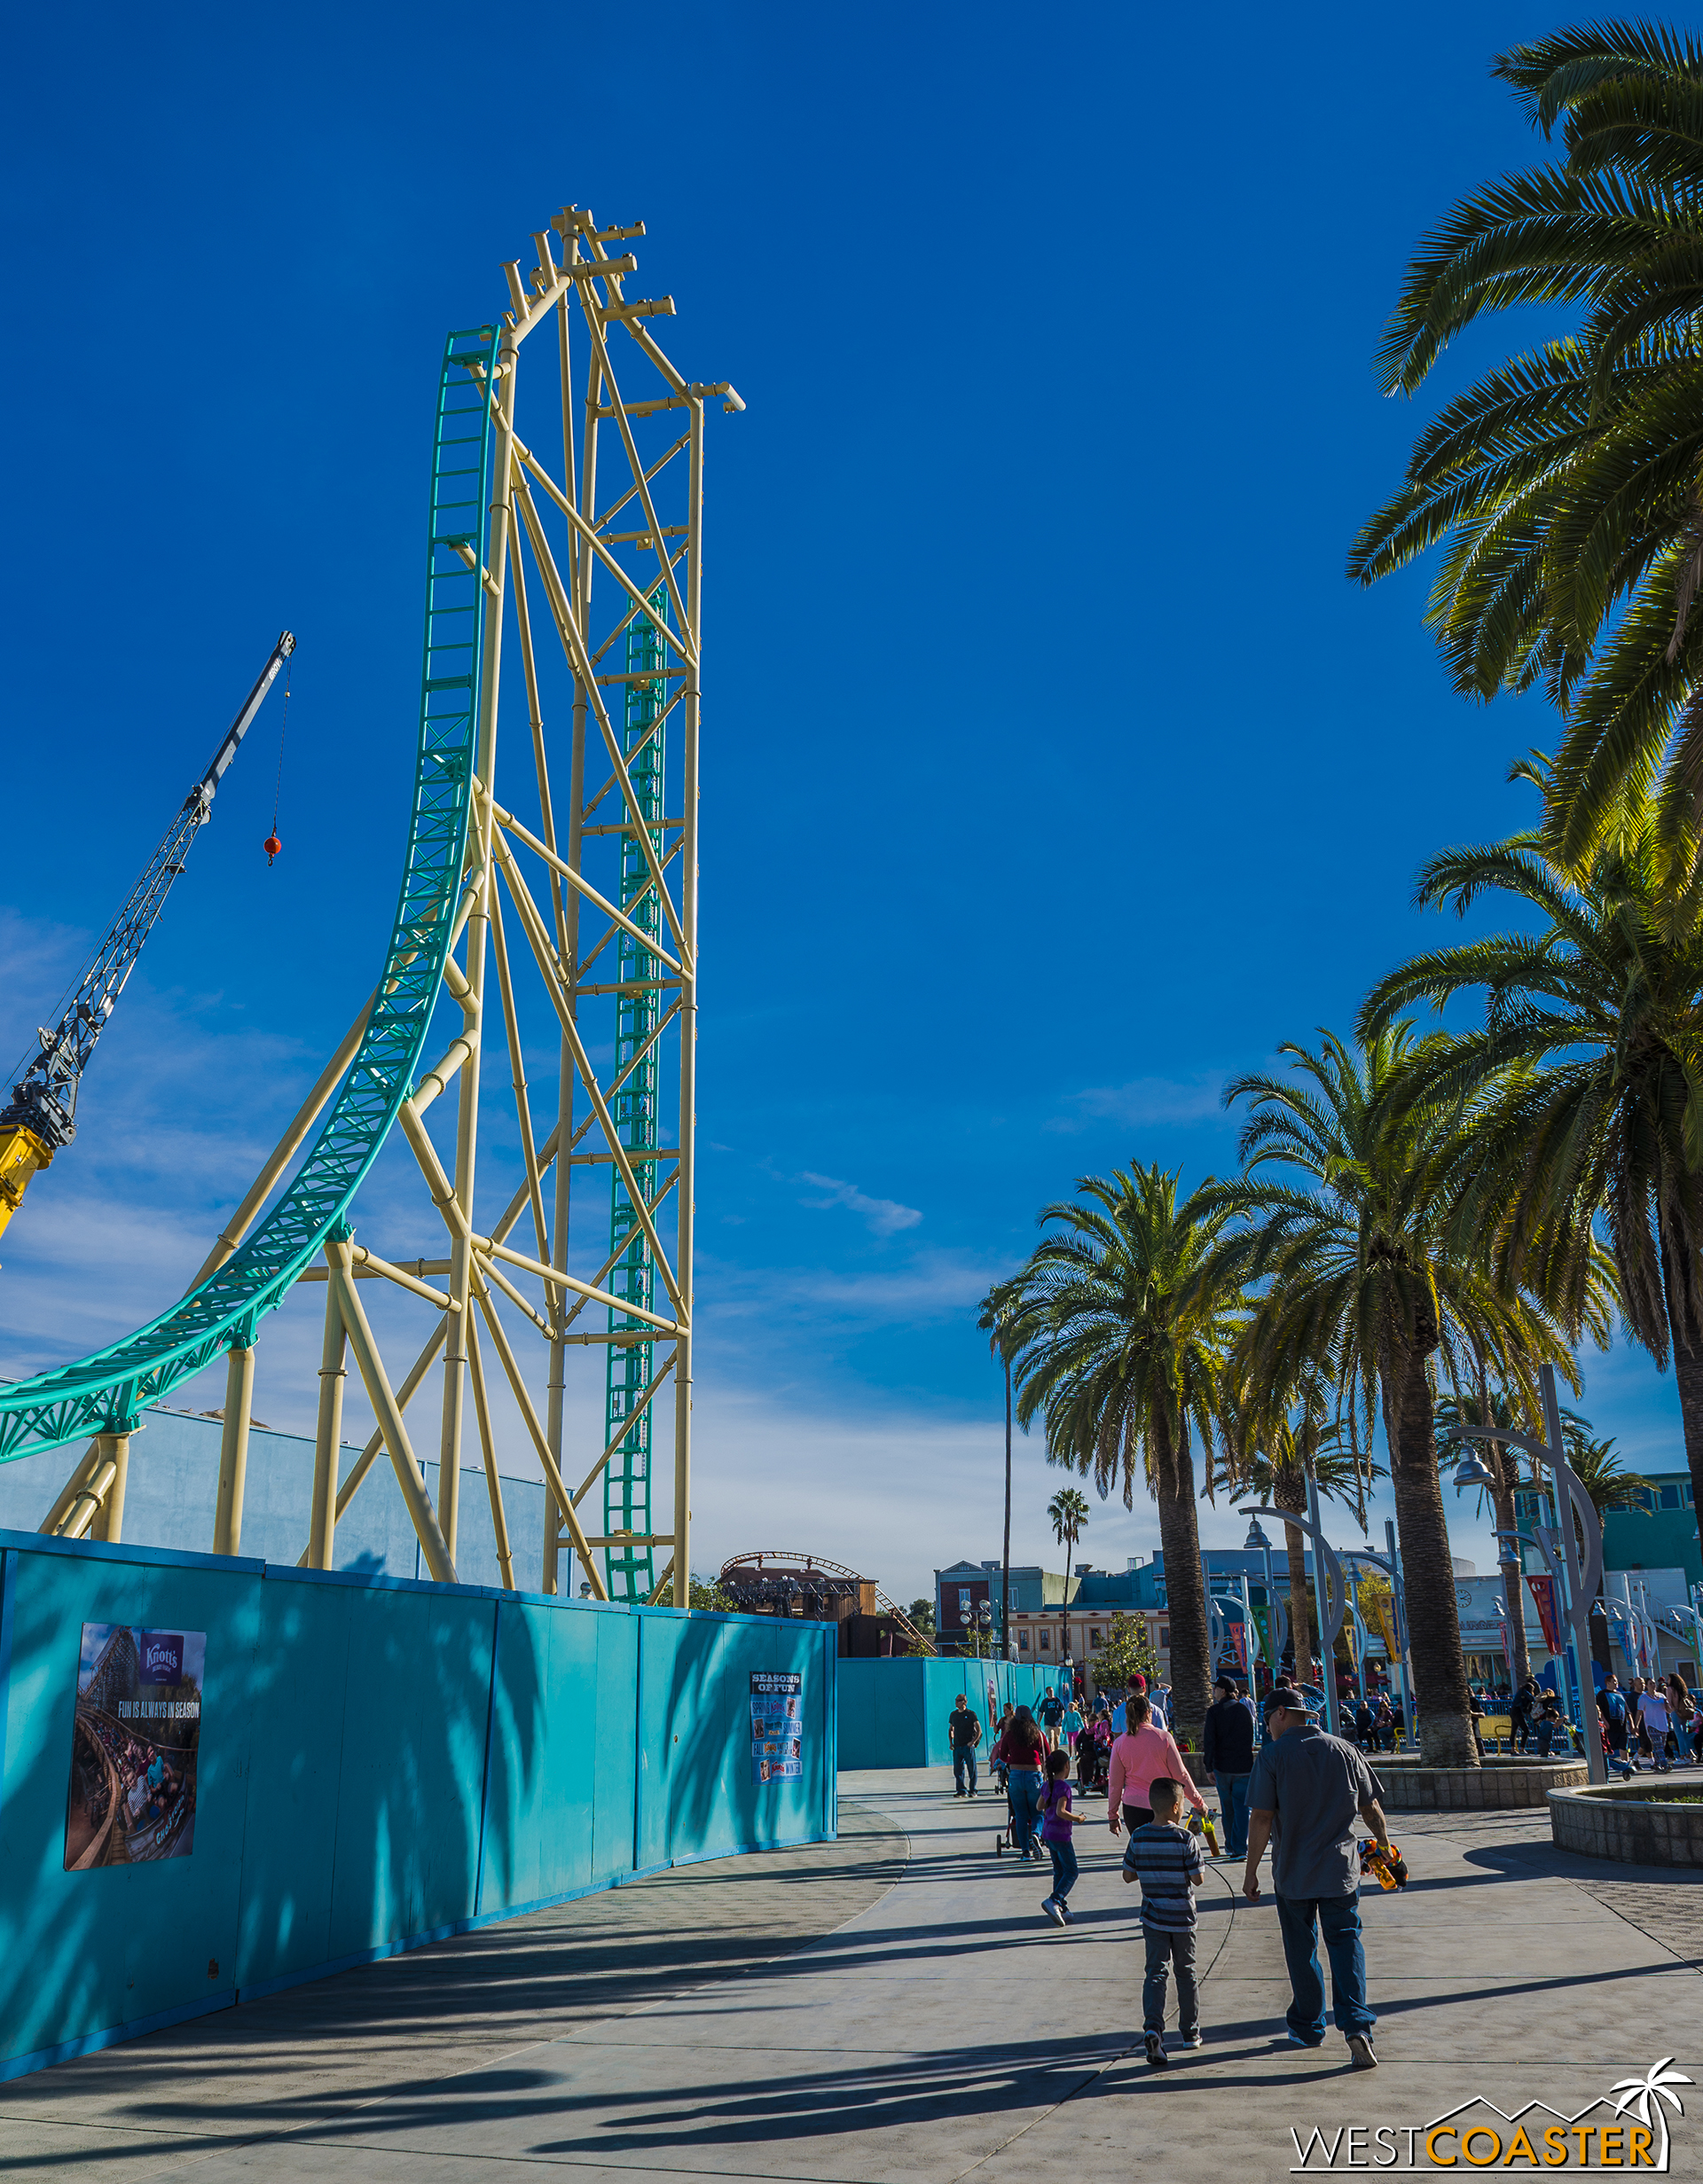  The palm trees provide scale for how towering this ride will be! 